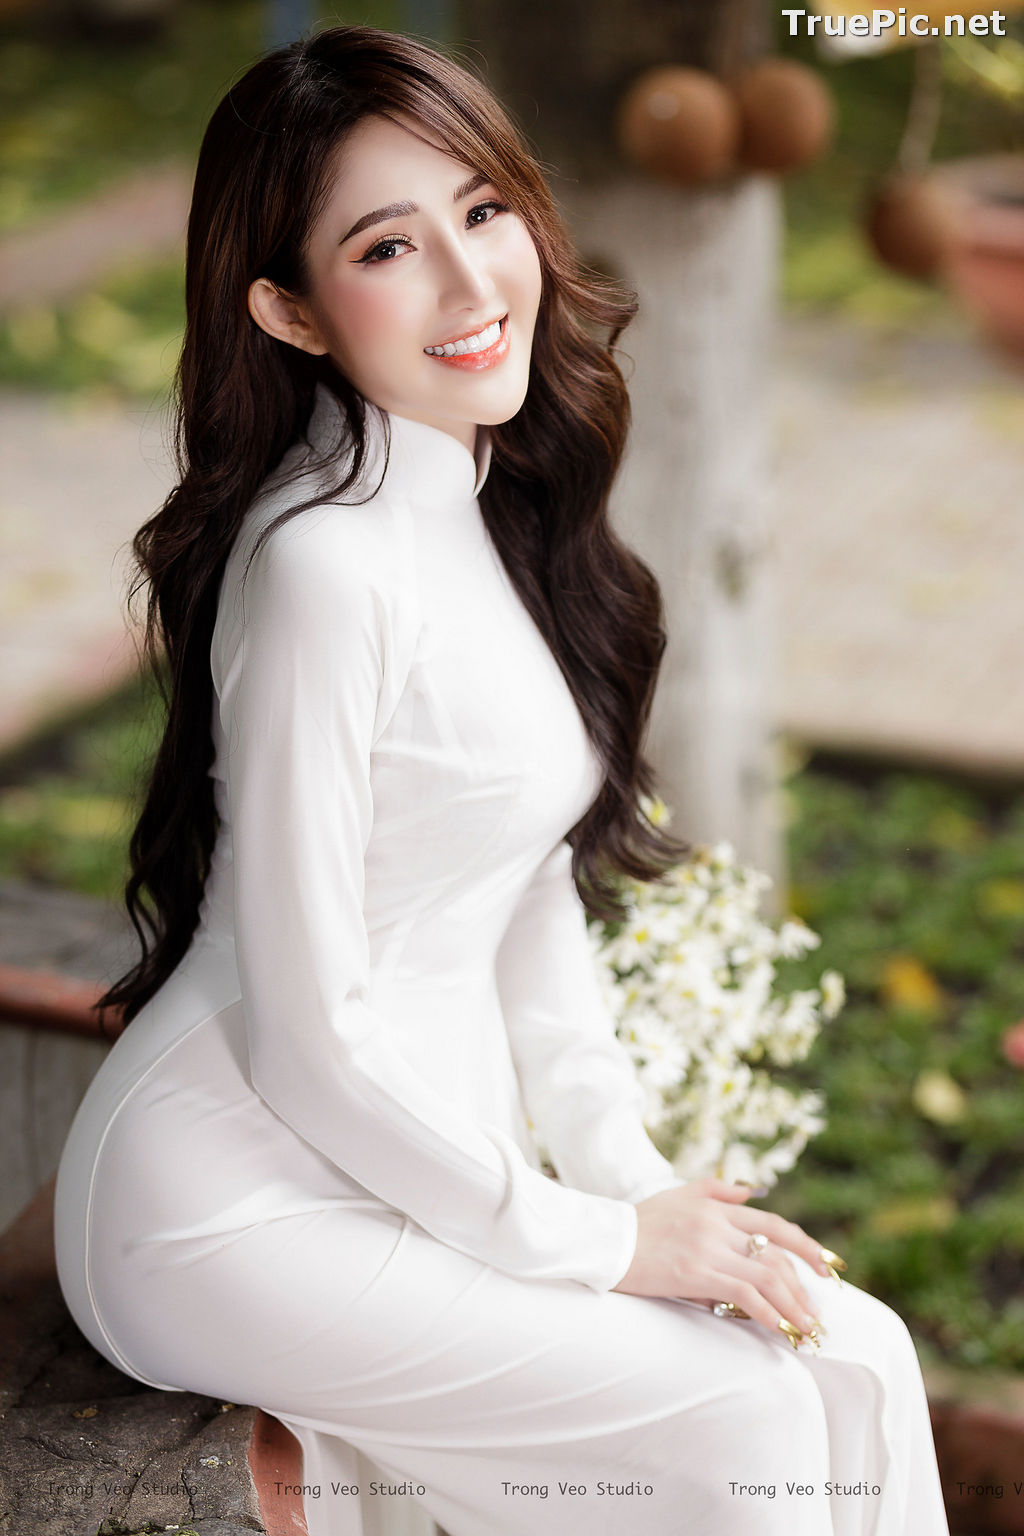 True Pic: The Beauty of Vietnamese Girls with Traditional Dress (Ao Dai) #3